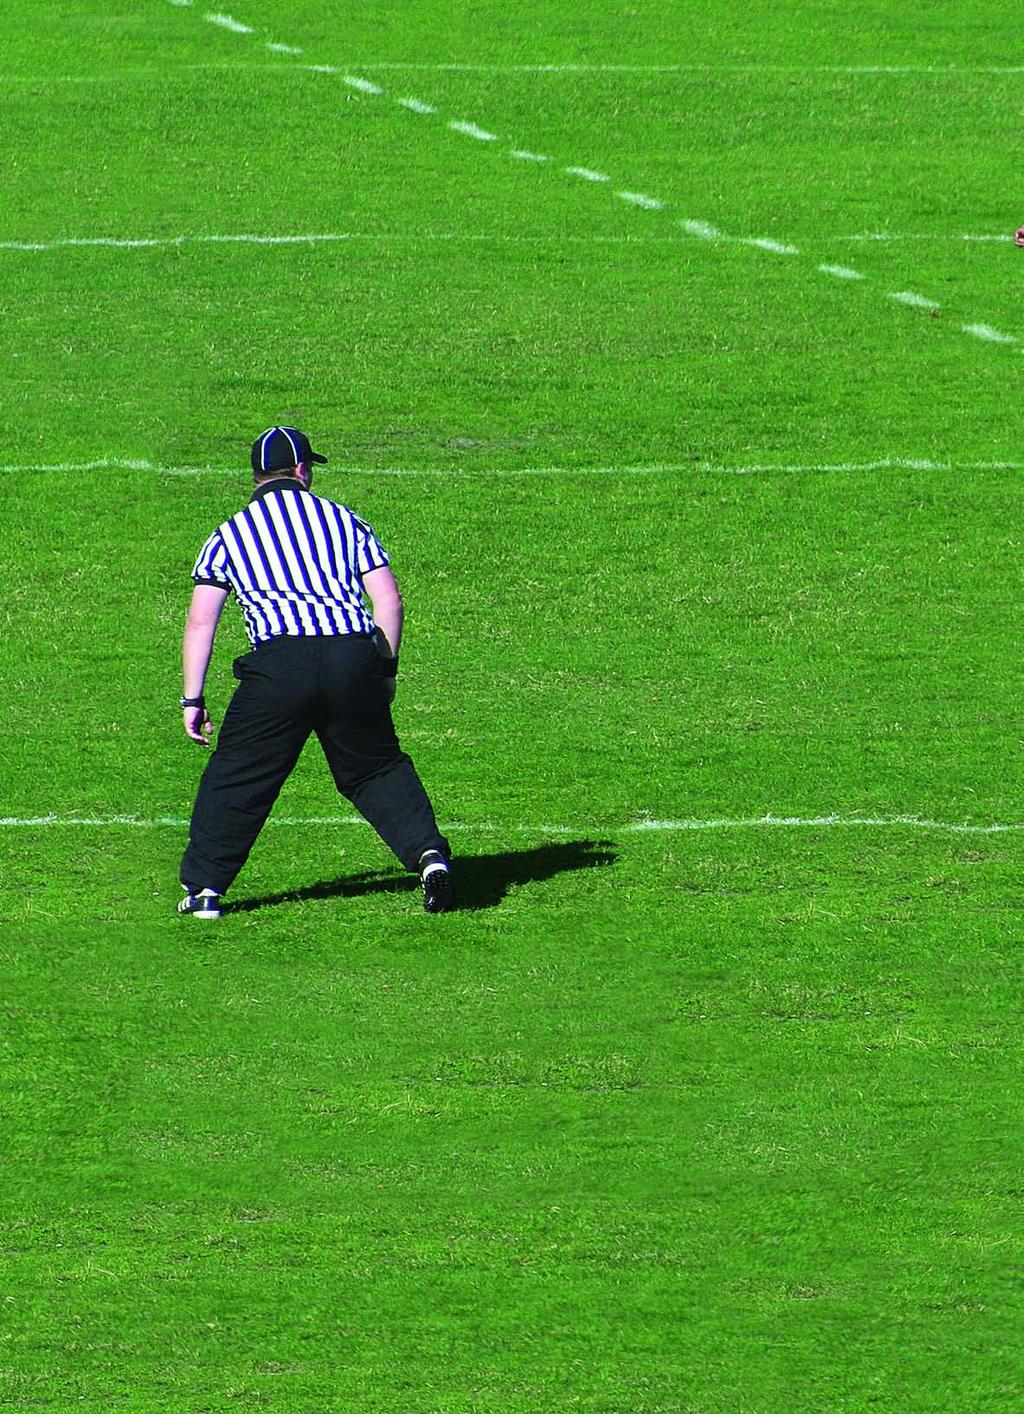 How did you get your start in officiating? Many young men and women first develop their skills on college campuses by officiating intramural sports.